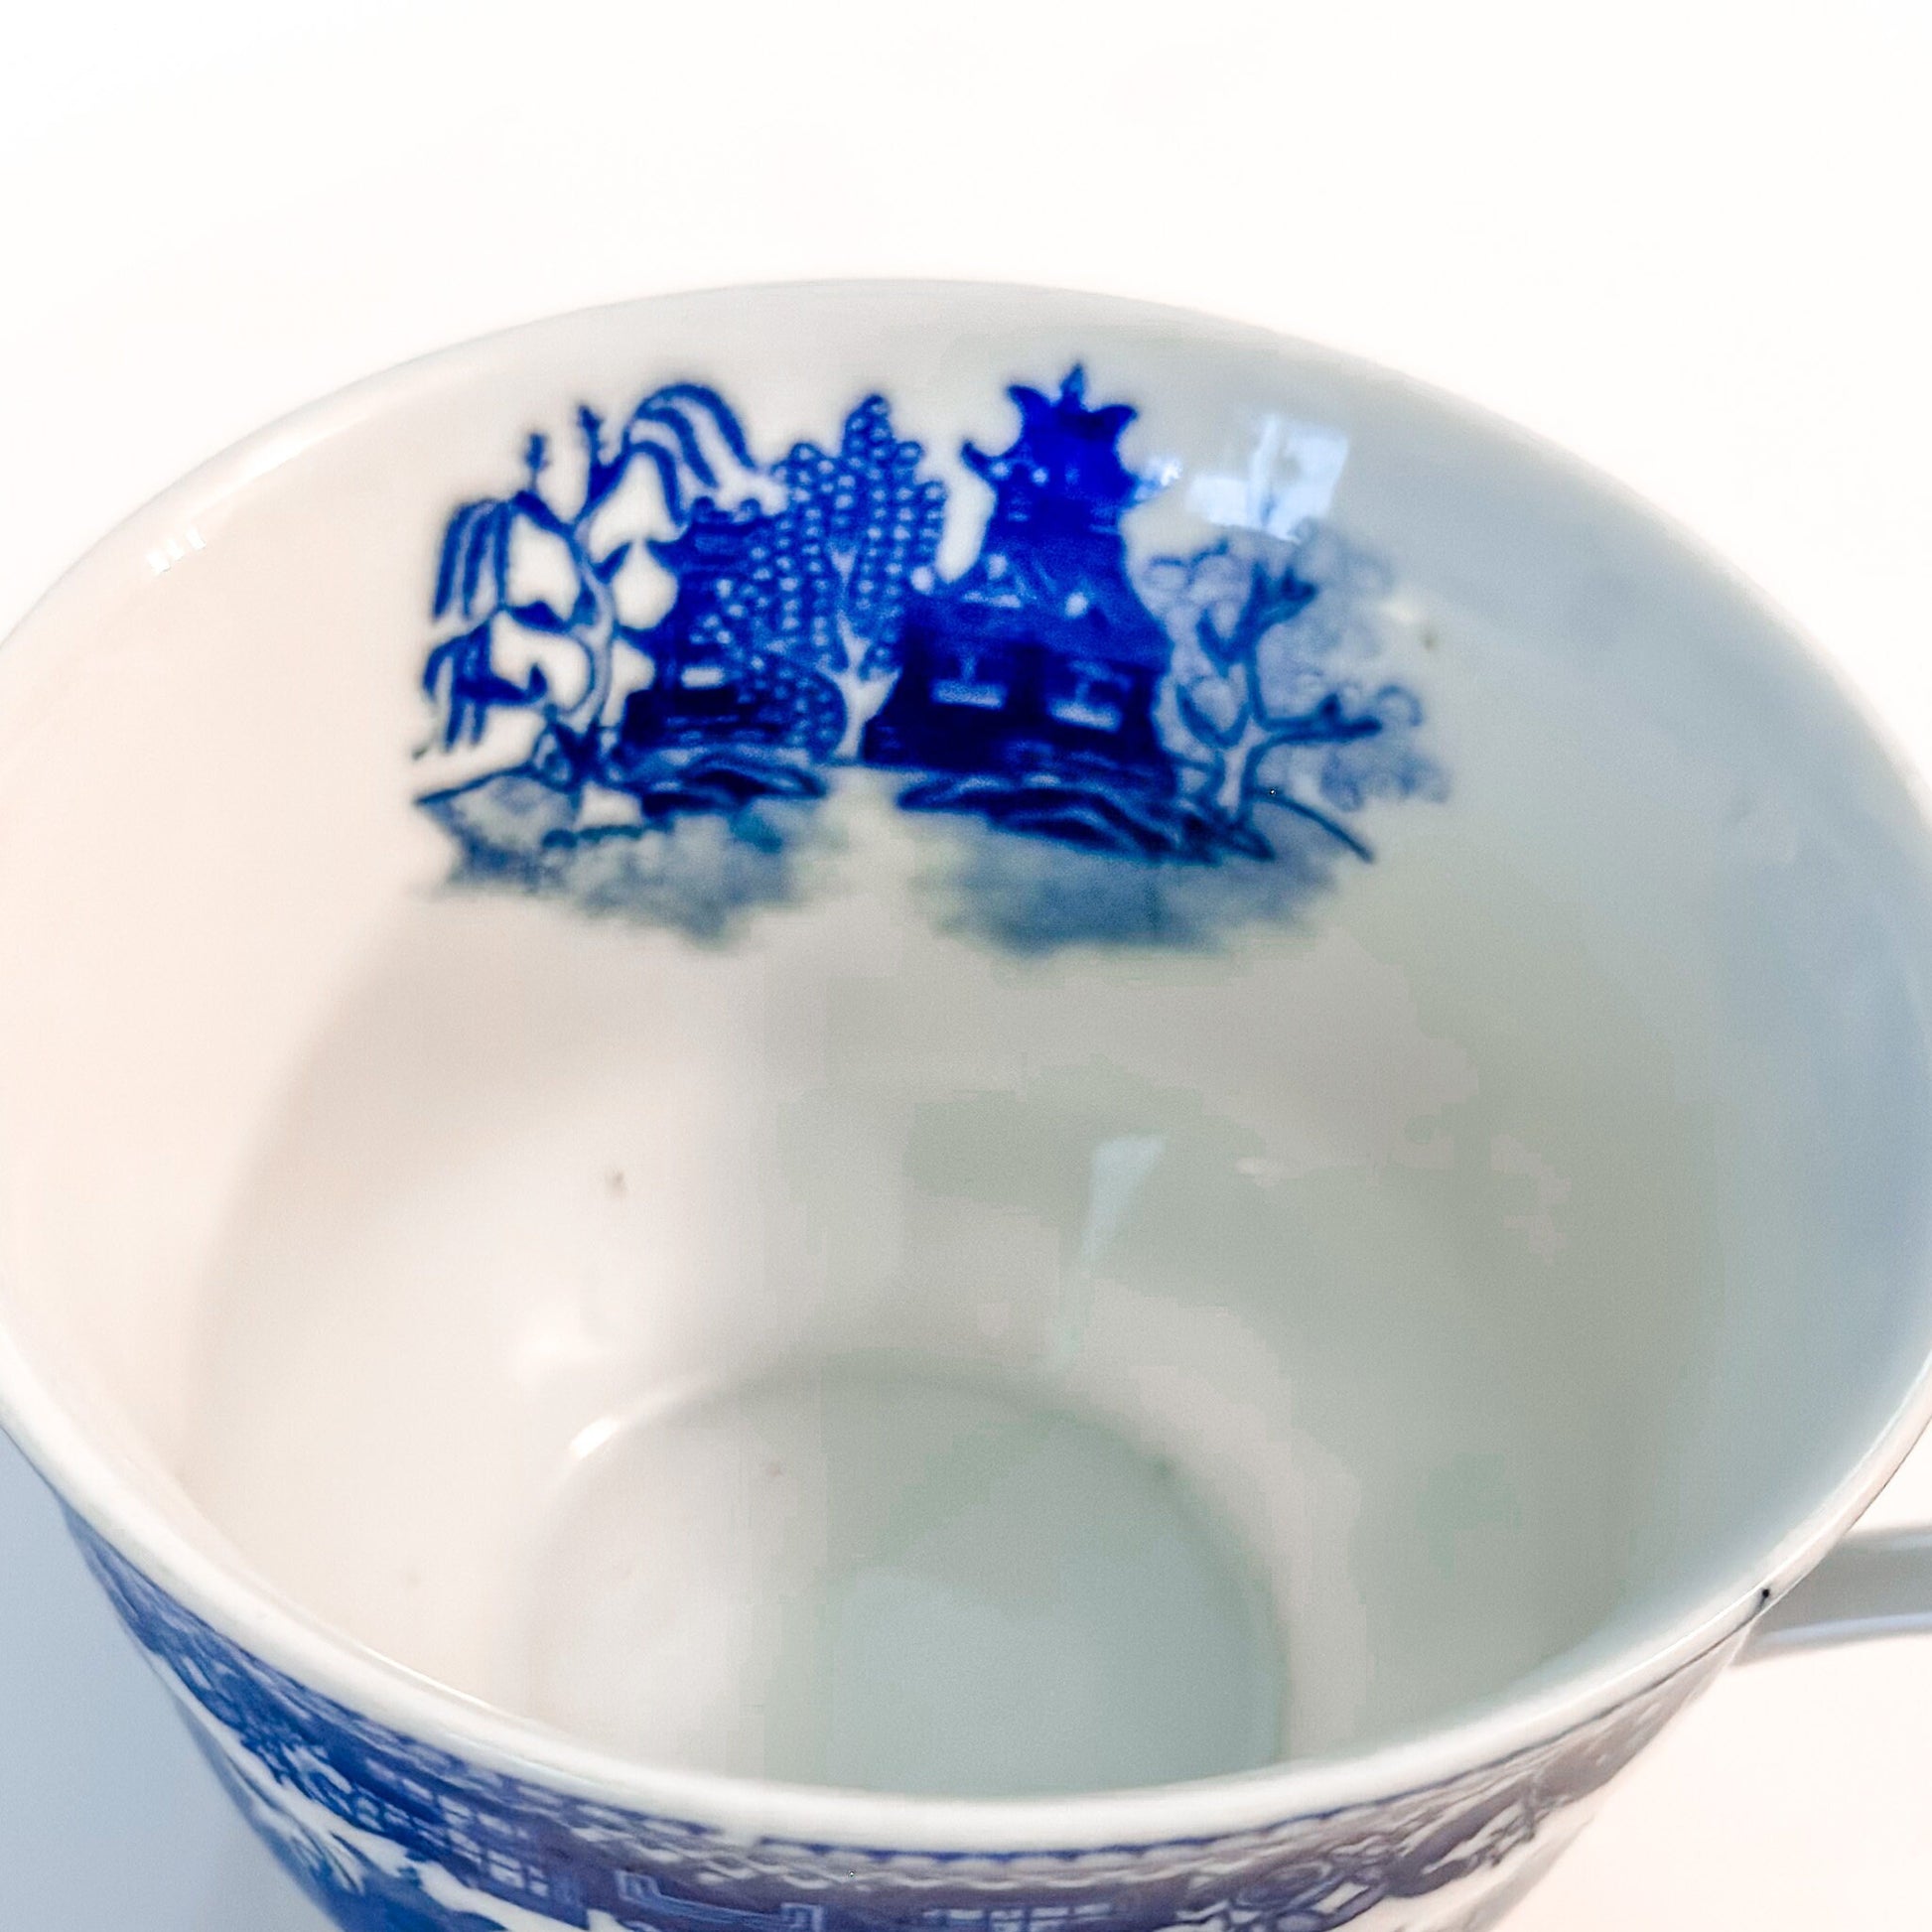 Vintage Blue Willow Teacup Candle